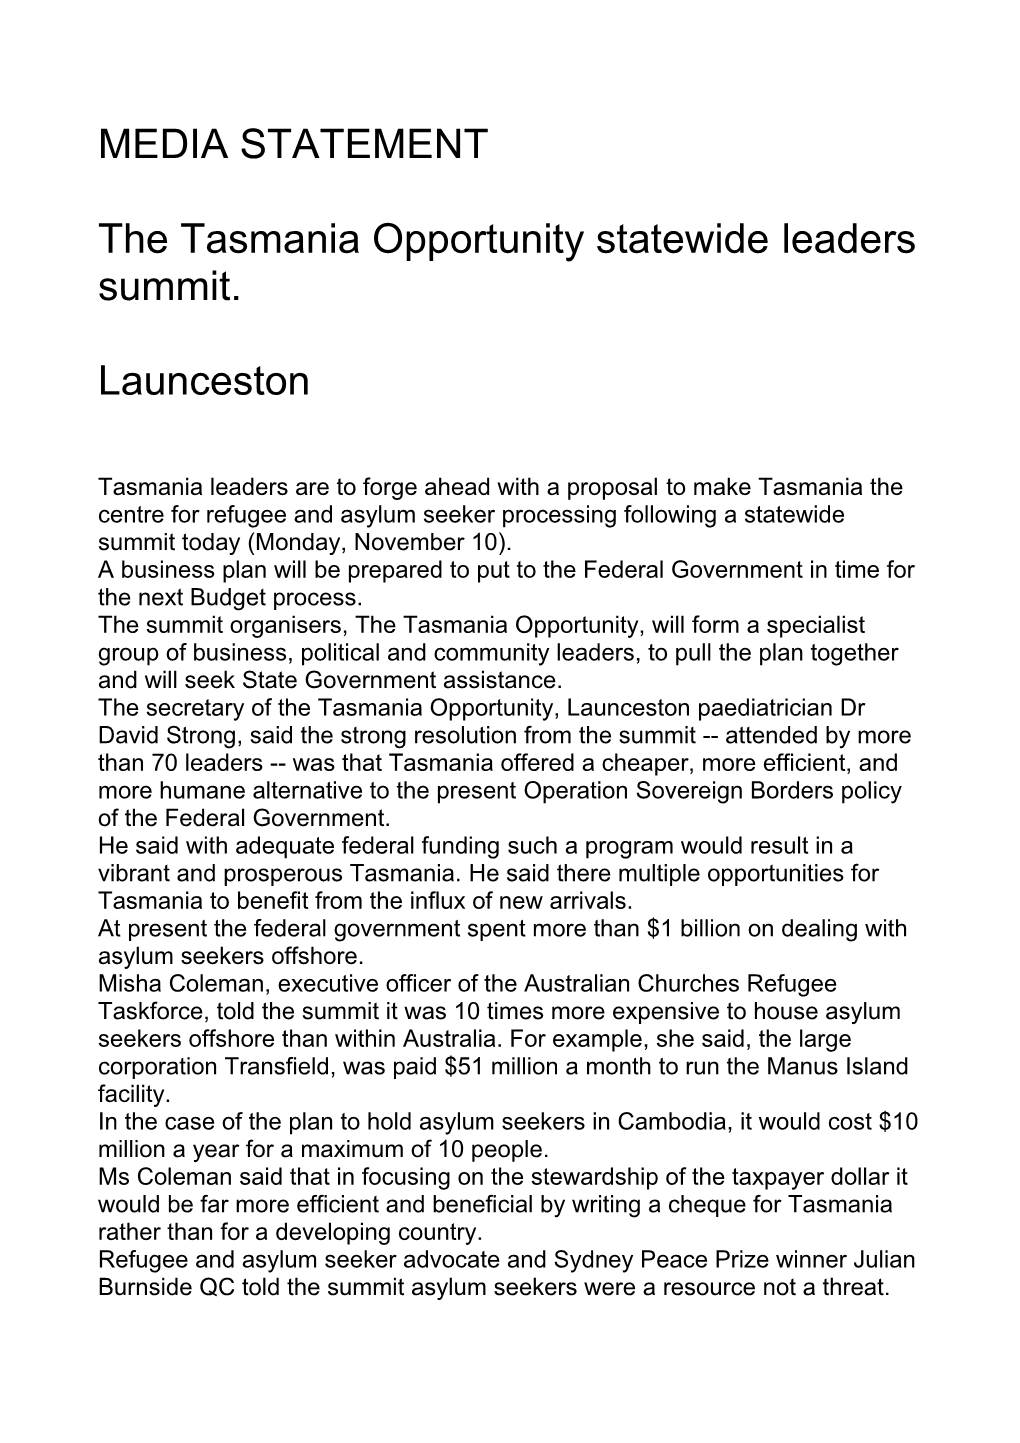 The Tasmania Opportunity Statewide Leaders Summit